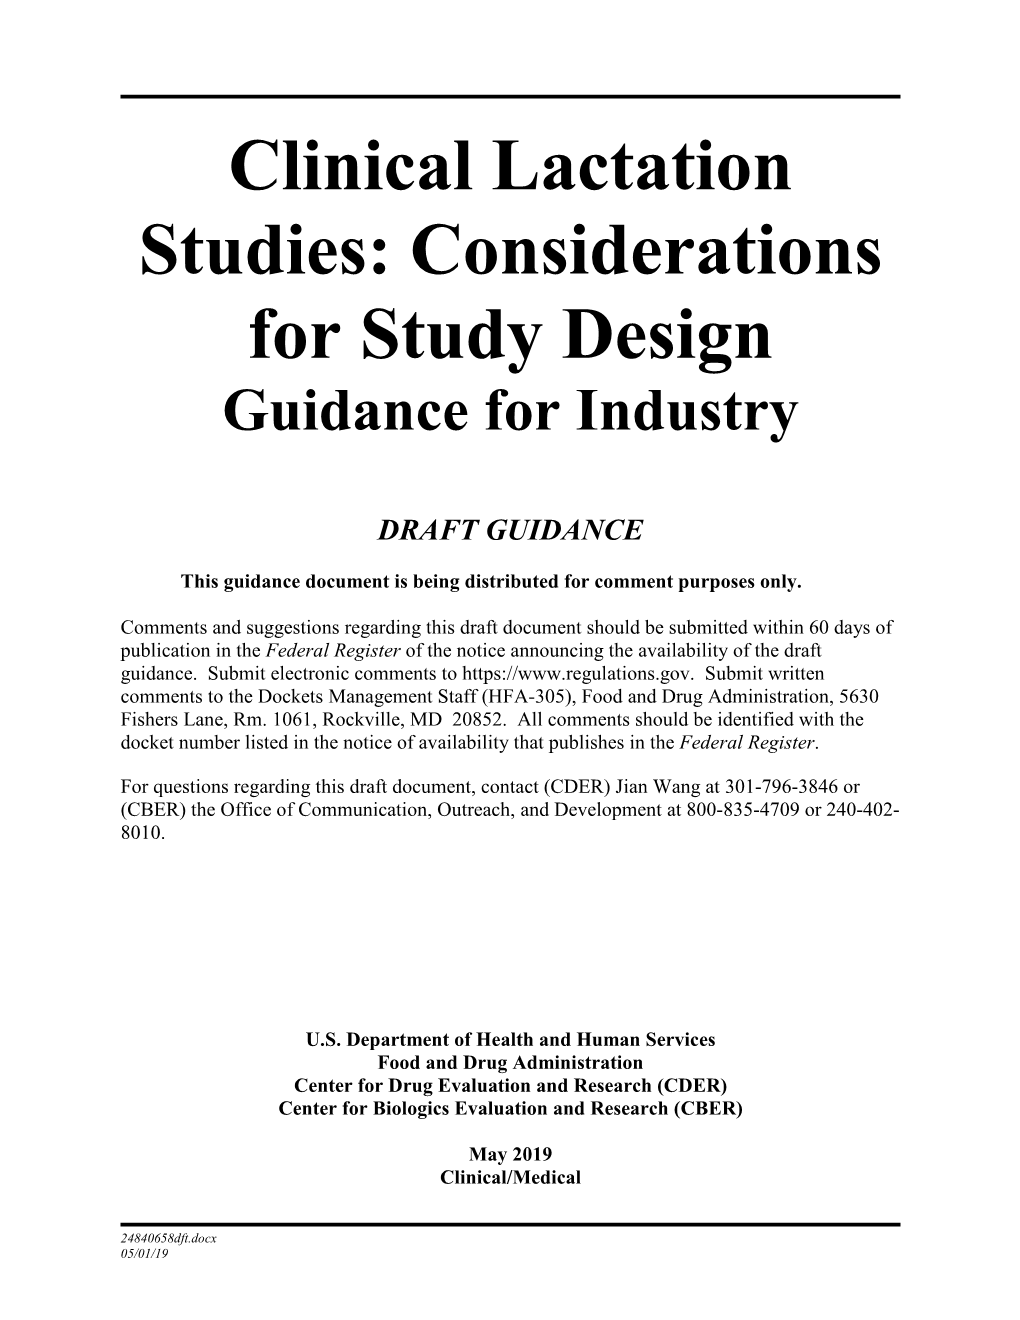 Clinical Lactation Studies: Considerations for Study Design Guidance for Industry